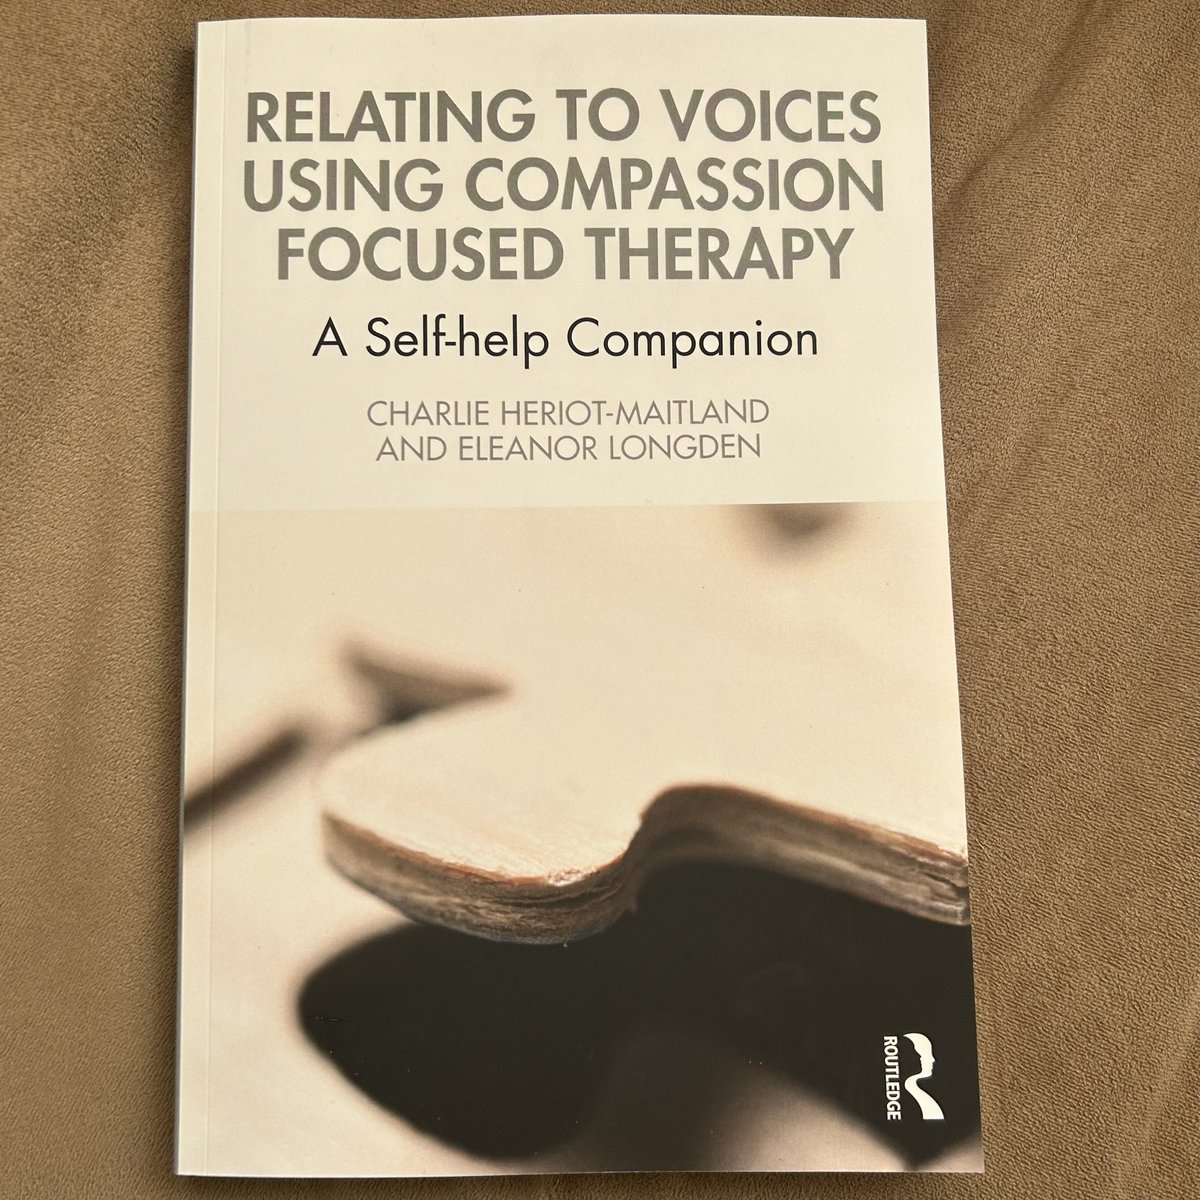 This wonderful book on voices reviews evidence of how the content and emotional tone of voices correlates with social beliefs: if voices are framed as a ‘symptom’ of a disorder, the experience is far more negative. What if psychiatry is harming patients with its messaging? @DrCHM